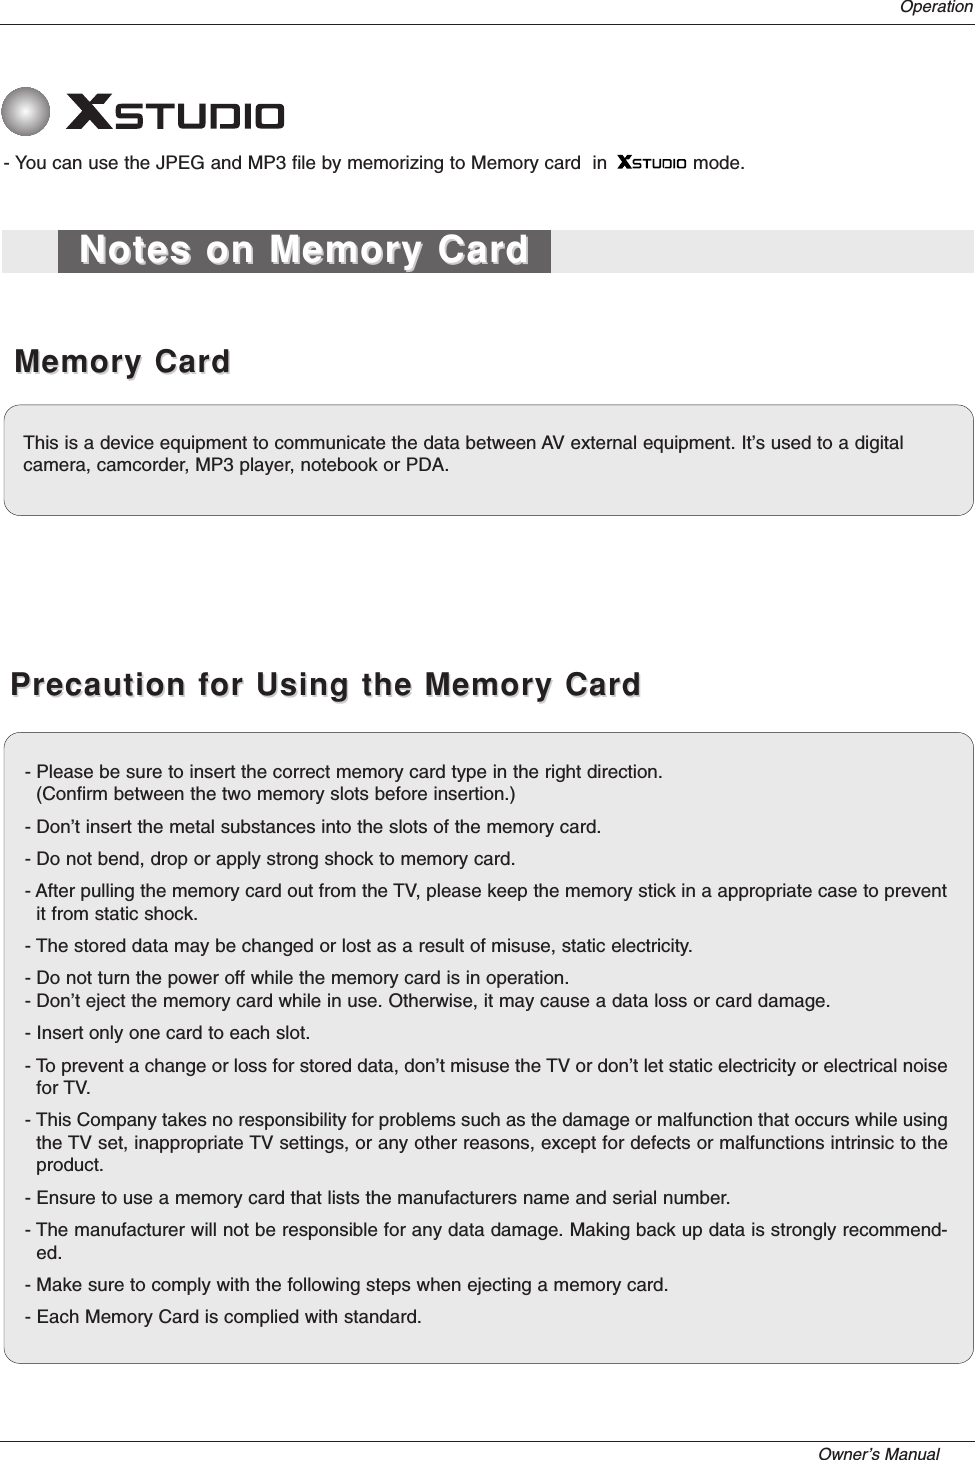 Owner’s Manual   Operation- You can use the JPEG and MP3 file by memorizing to Memory card  in               mode.Memory CardMemory CardPrecaution for Using the Memory CardPrecaution for Using the Memory CardNotes on Memory CardNotes on Memory CardThis is a device equipment to communicate the data between AV external equipment. It’s used to a digital camera, camcorder, MP3 player, notebook or PDA.- Please be sure to insert the correct memory card type in the right direction. (Confirm between the two memory slots before insertion.)- Don’t insert the metal substances into the slots of the memory card.- Do not bend, drop or apply strong shock to memory card.- After pulling the memory card out from the TV, please keep the memory stick in a appropriate case to preventit from static shock.- The stored data may be changed or lost as a result of misuse, static electricity. - Do not turn the power off while the memory card is in operation.- Don’t eject the memory card while in use. Otherwise, it may cause a data loss or card damage.- Insert only one card to each slot.- To prevent a change or loss for stored data, don’t misuse the TV or don’t let static electricity or electrical noisefor TV. - This Company takes no responsibility for problems such as the damage or malfunction that occurs while usingthe TV set, inappropriate TV settings, or any other reasons, except for defects or malfunctions intrinsic to theproduct.- Ensure to use a memory card that lists the manufacturers name and serial number.- The manufacturer will not be responsible for any data damage. Making back up data is strongly recommend-ed.- Make sure to comply with the following steps when ejecting a memory card.- Each Memory Card is complied with standard.